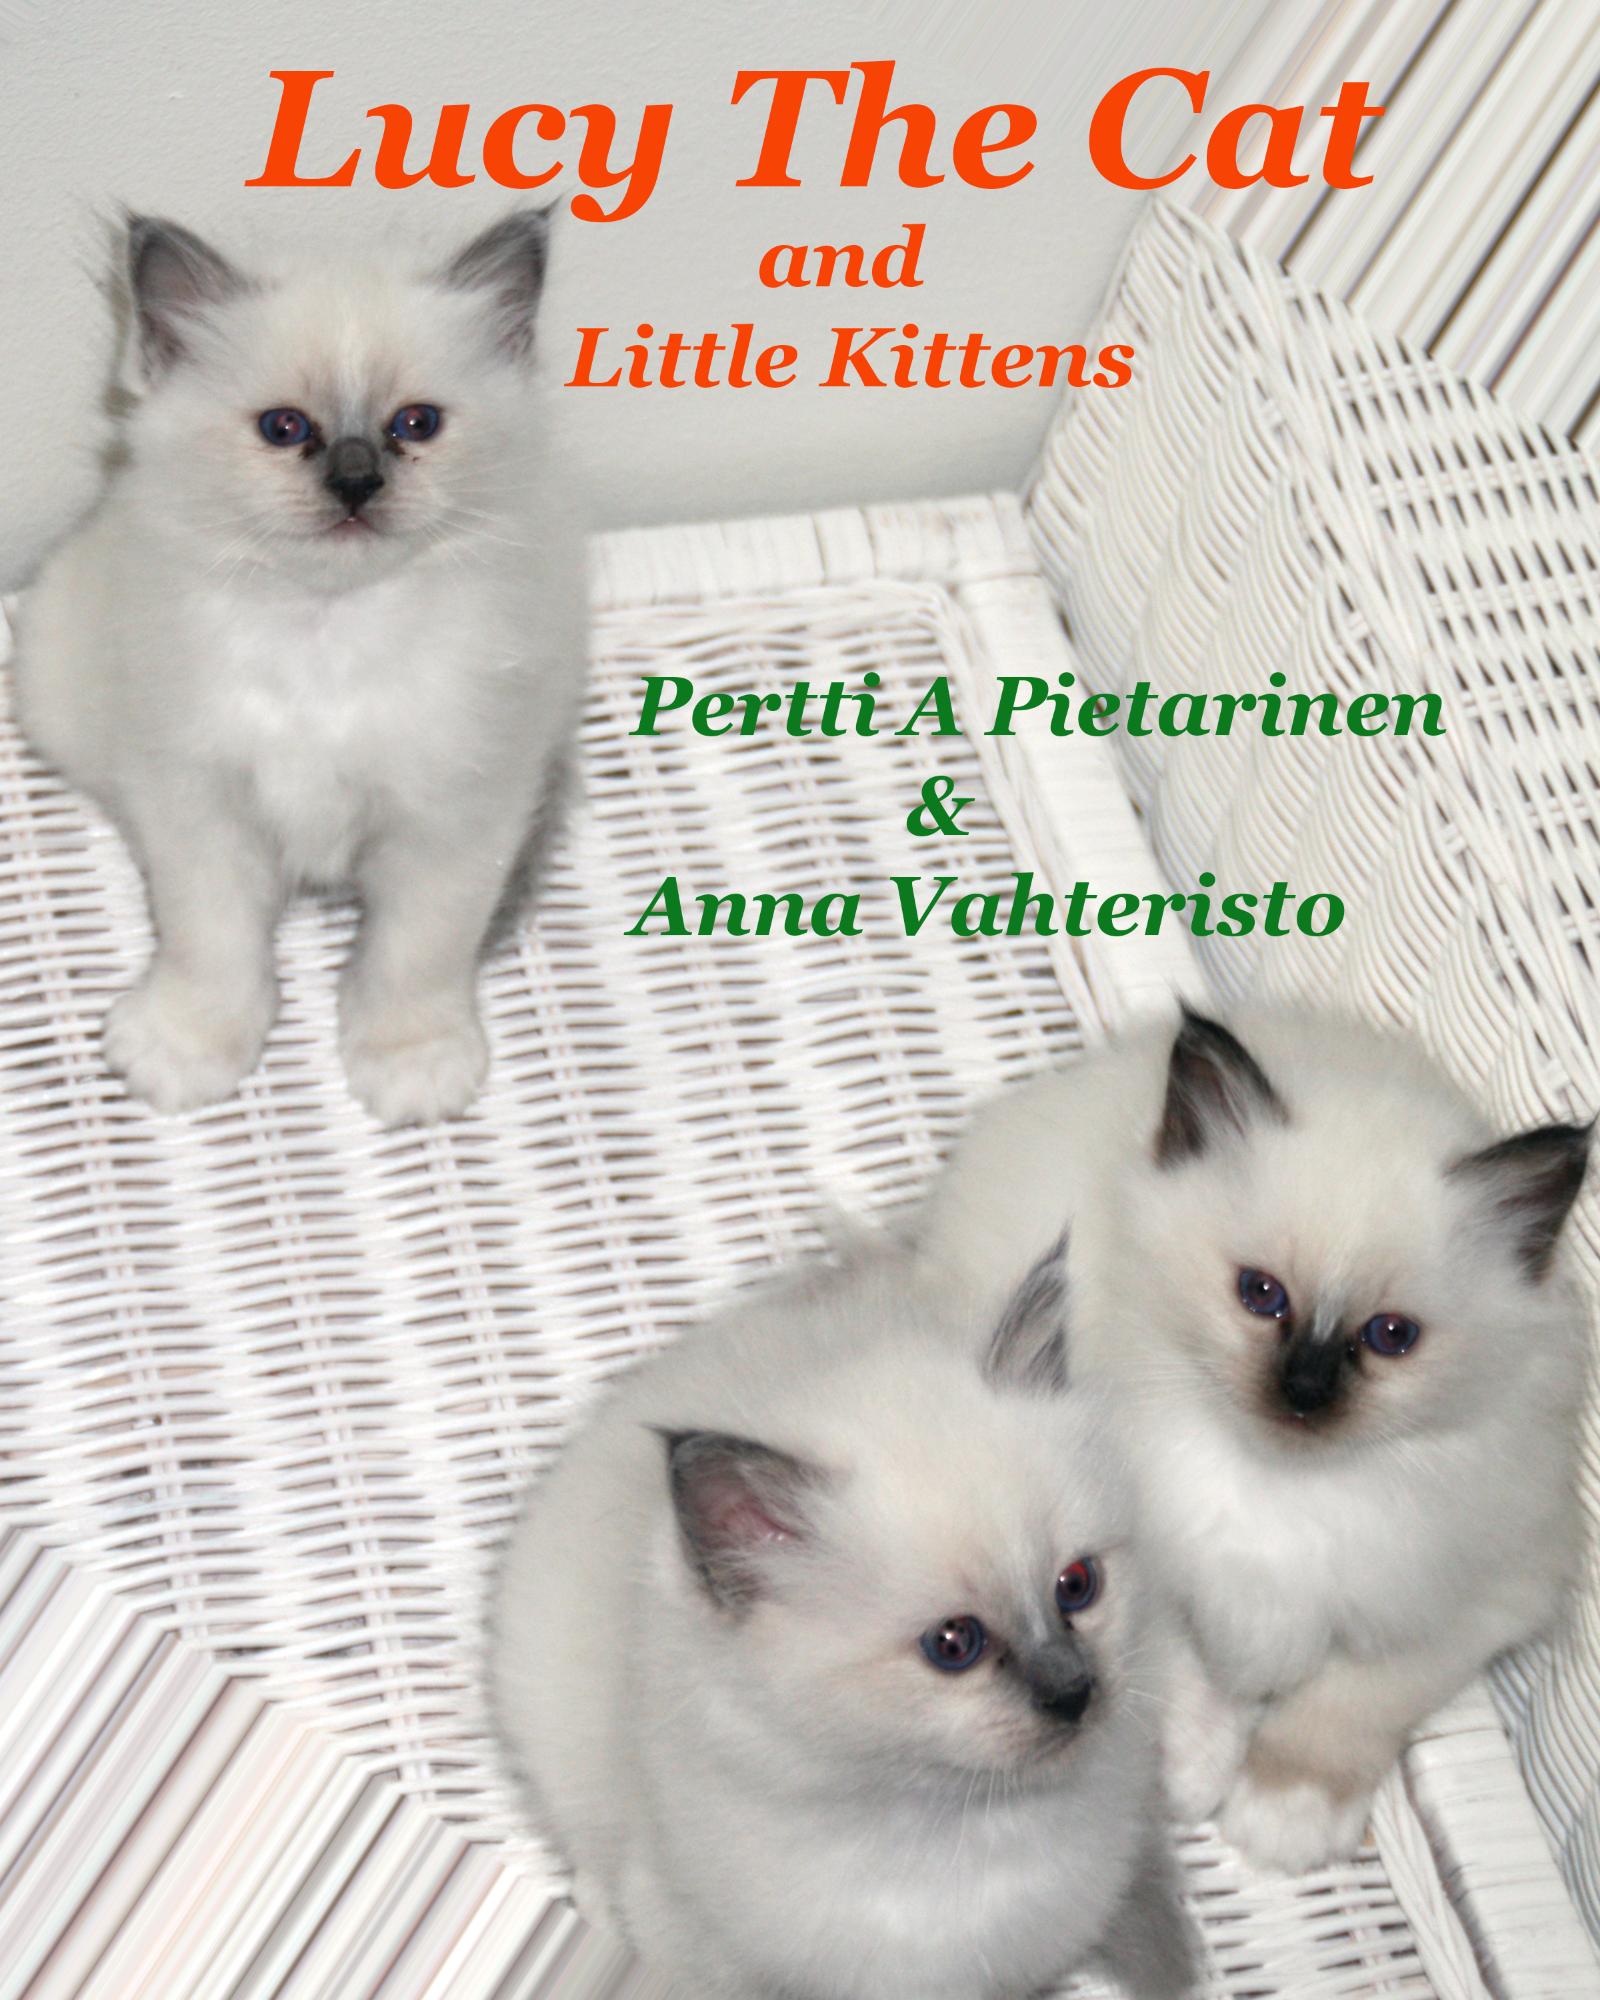 FREE: Lucy The Cat And Little Kittens by Pertti A Pietarinen